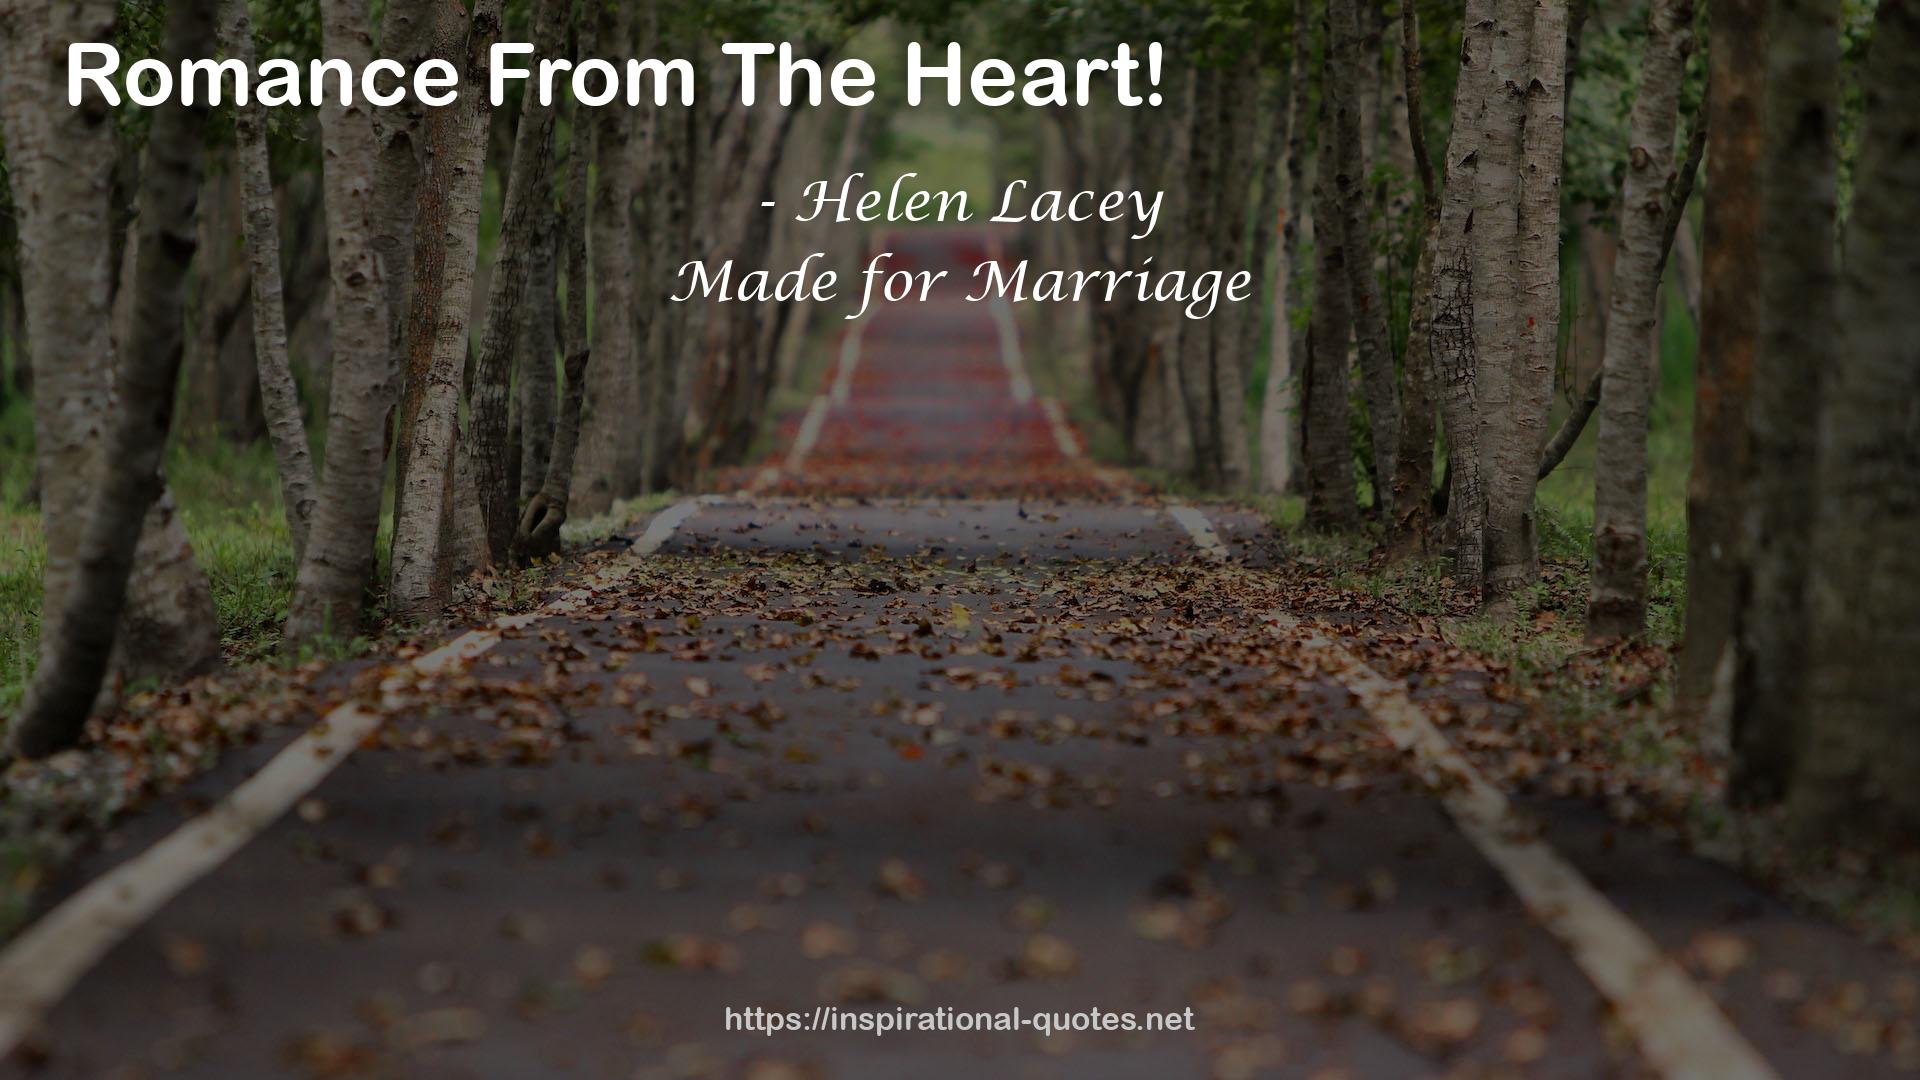 Helen Lacey QUOTES